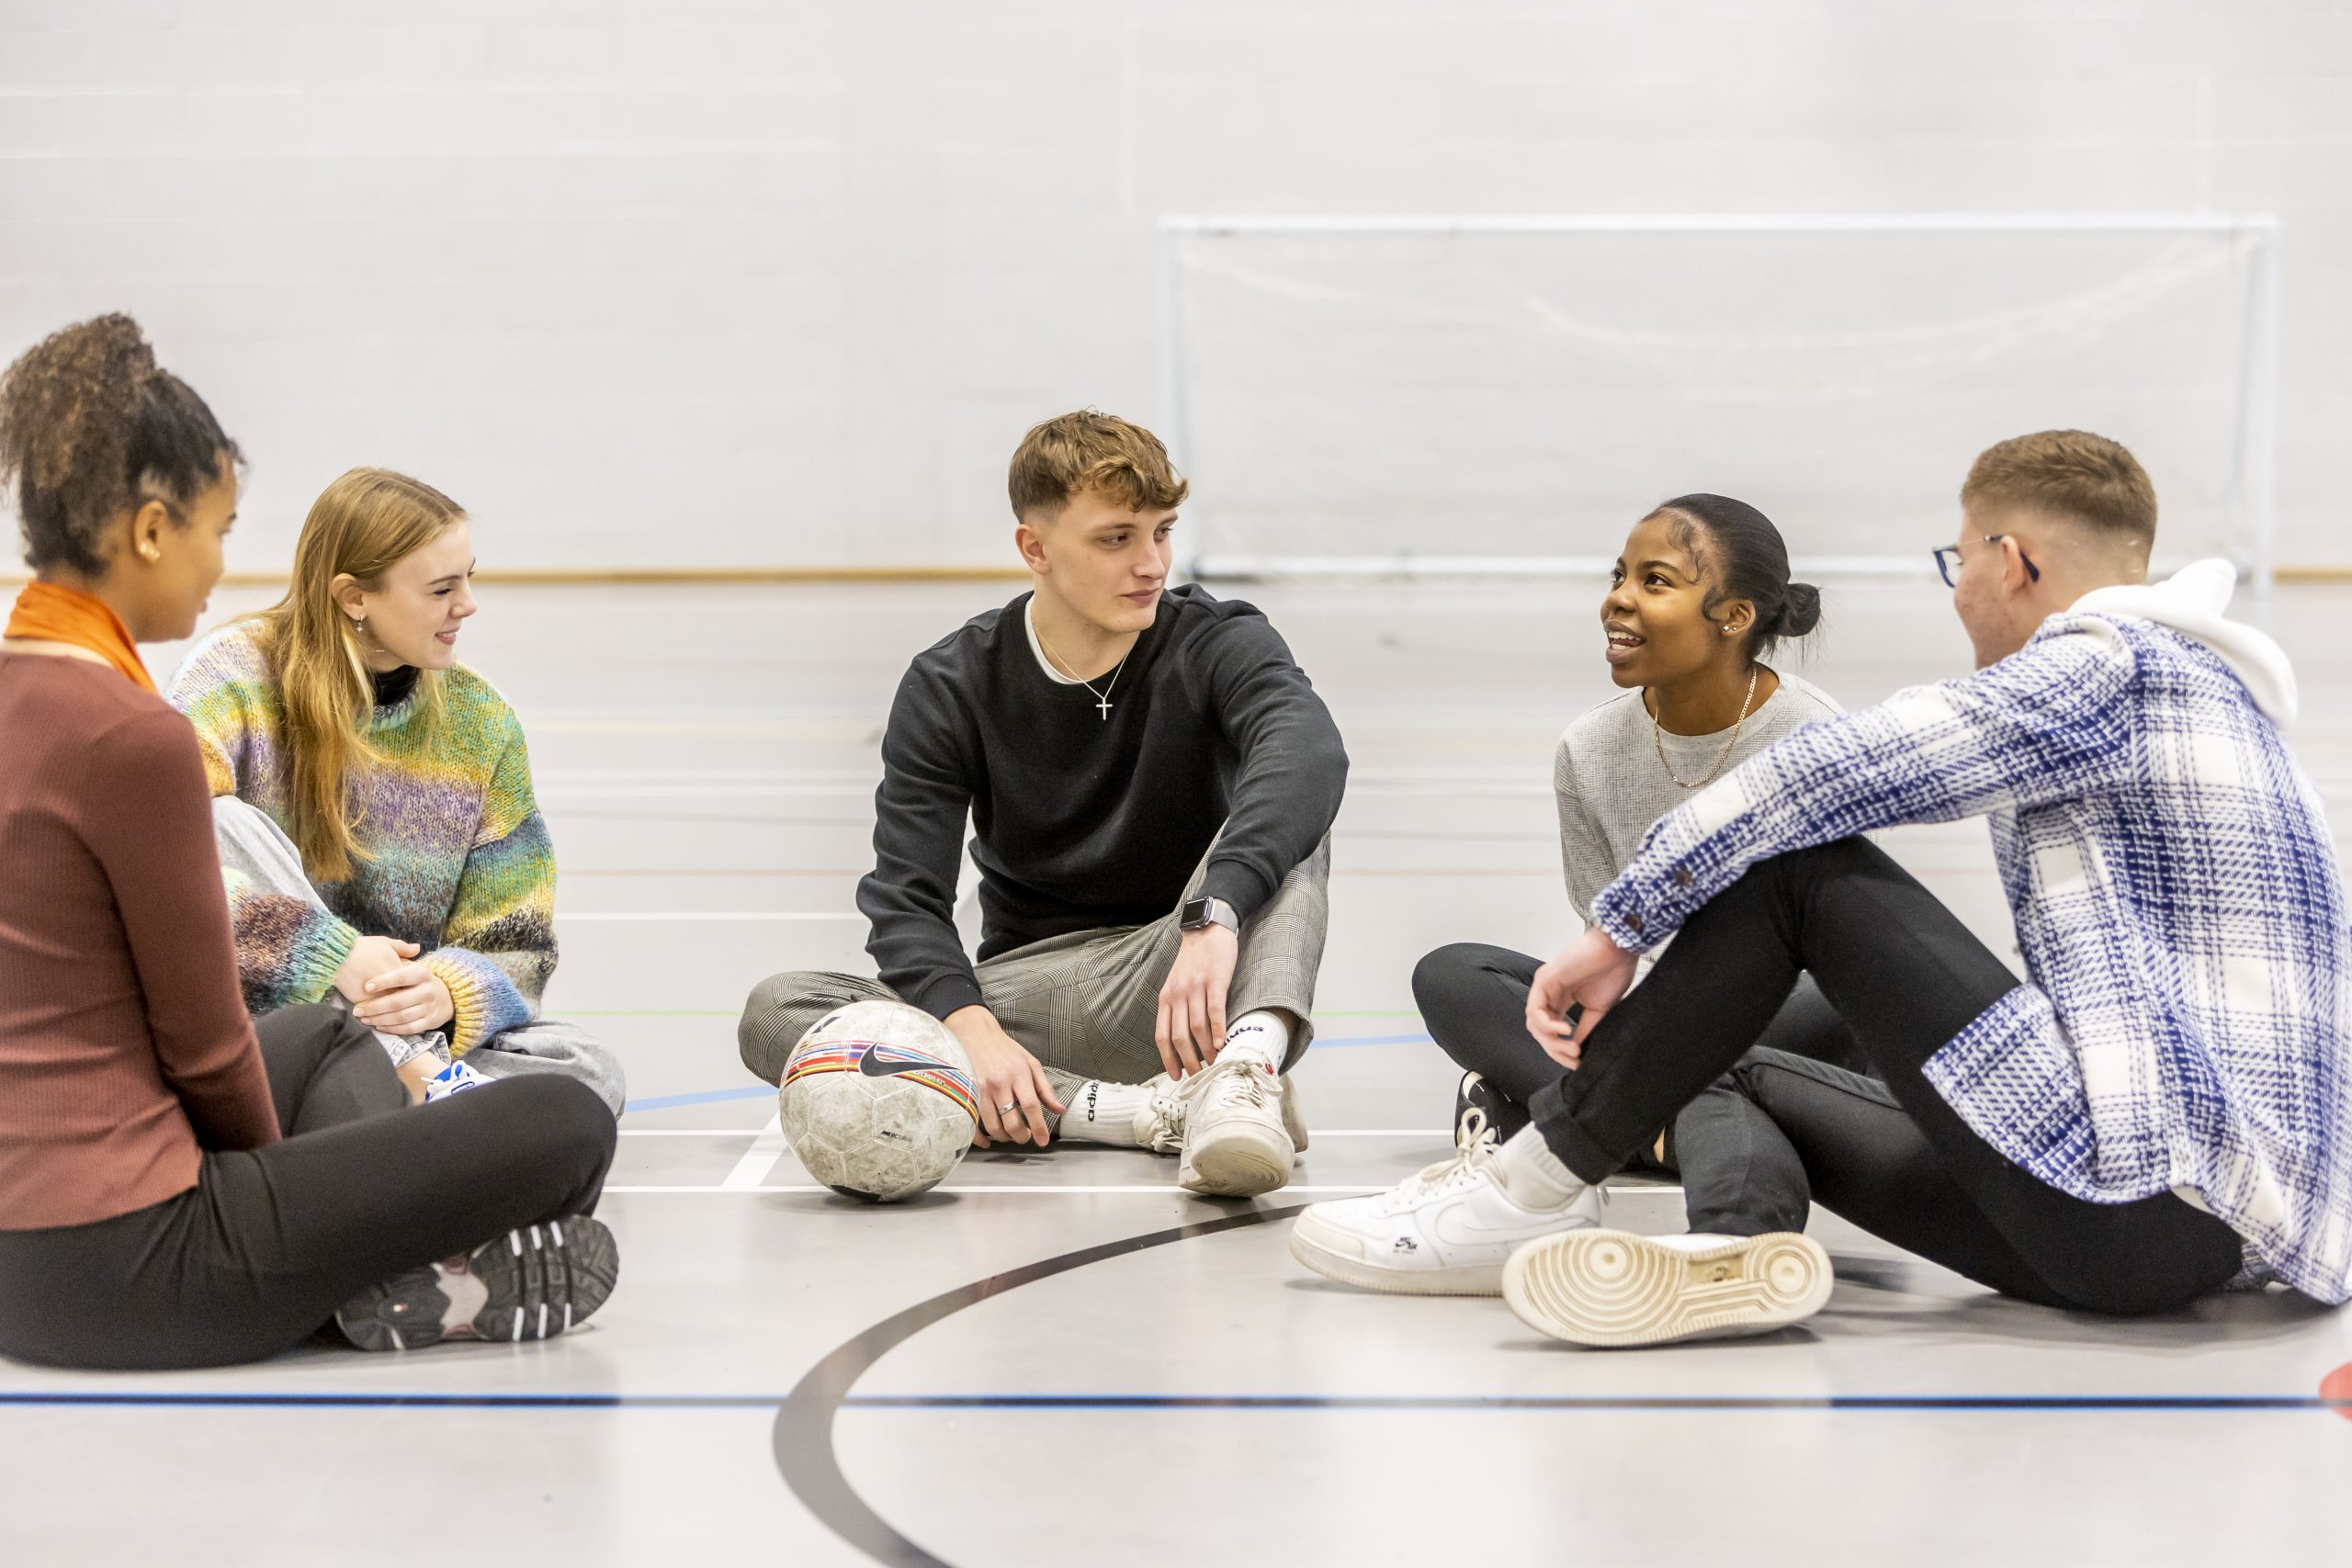 A group of young people are sitting on the floor of a school gym talking